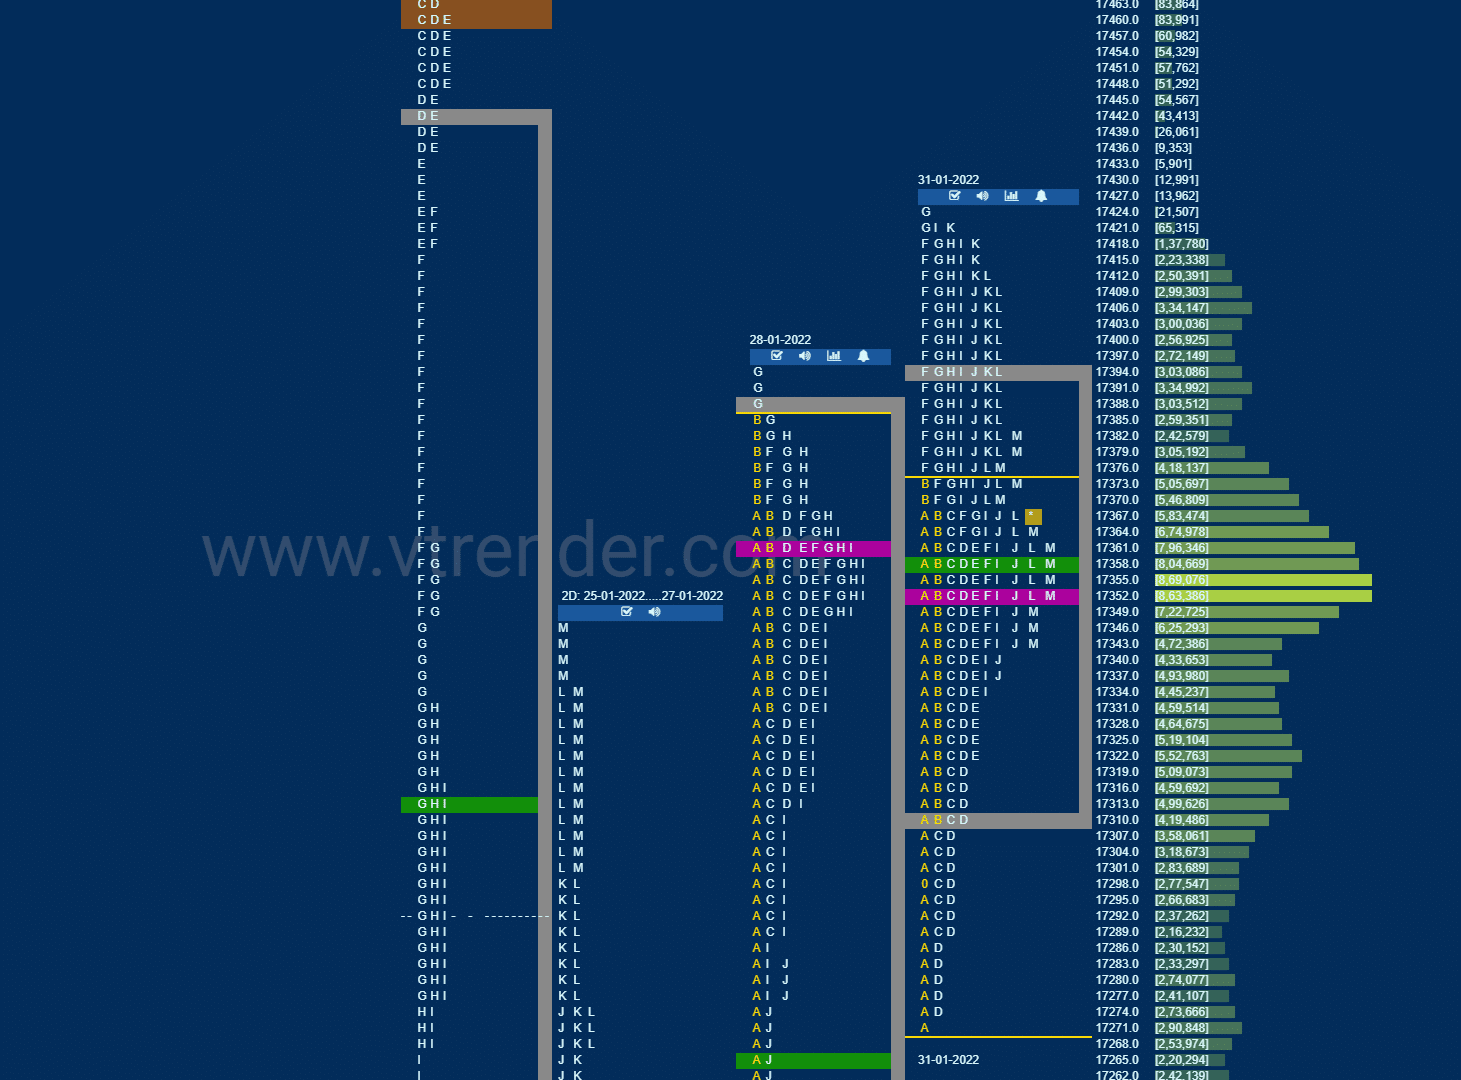 Nf 20 Market Profile Analysis Dated 31St January 2022 Banknifty Futures, Charts, Day Trading, Intraday Trading, Intraday Trading Strategies, Market Profile, Market Profile Trading Strategies, Nifty Futures, Order Flow Analysis, Support And Resistance, Technical Analysis, Trading Strategies, Volume Profile Trading